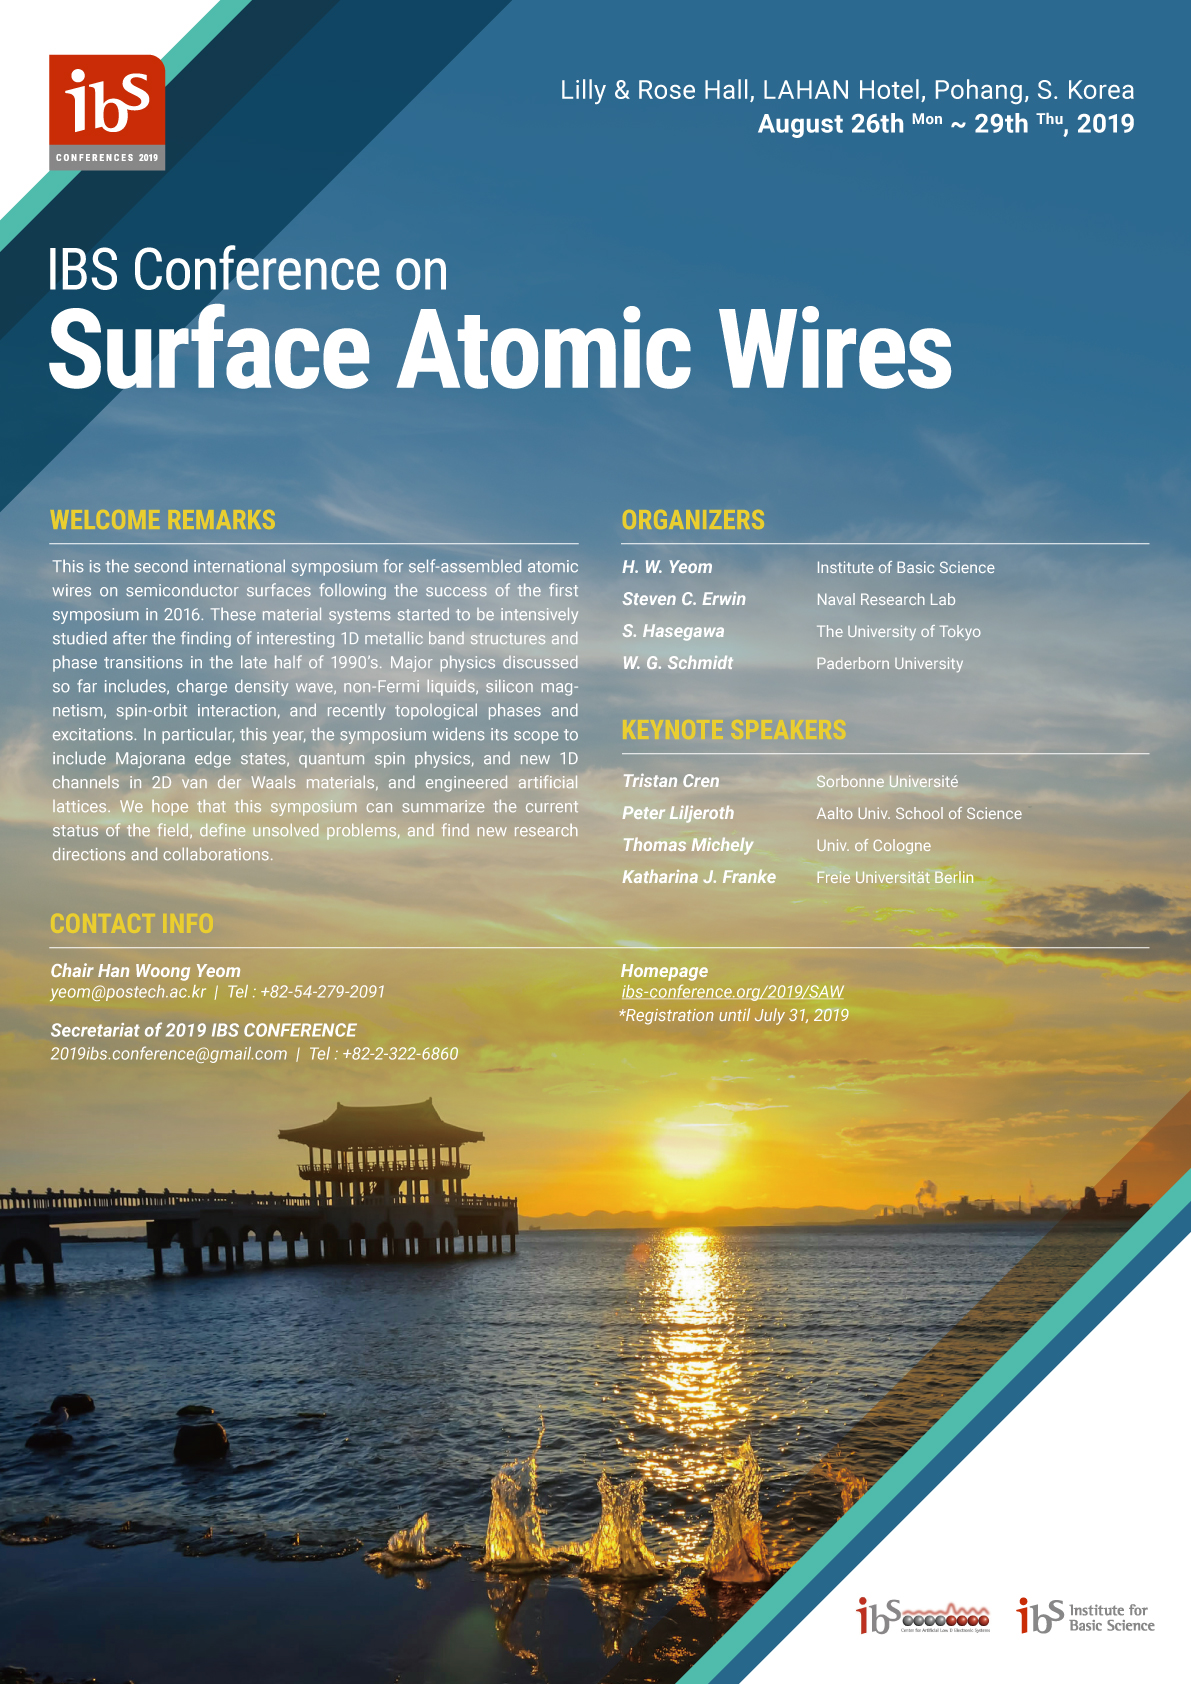 2019 IBS Conference on Surface Atomic Wires